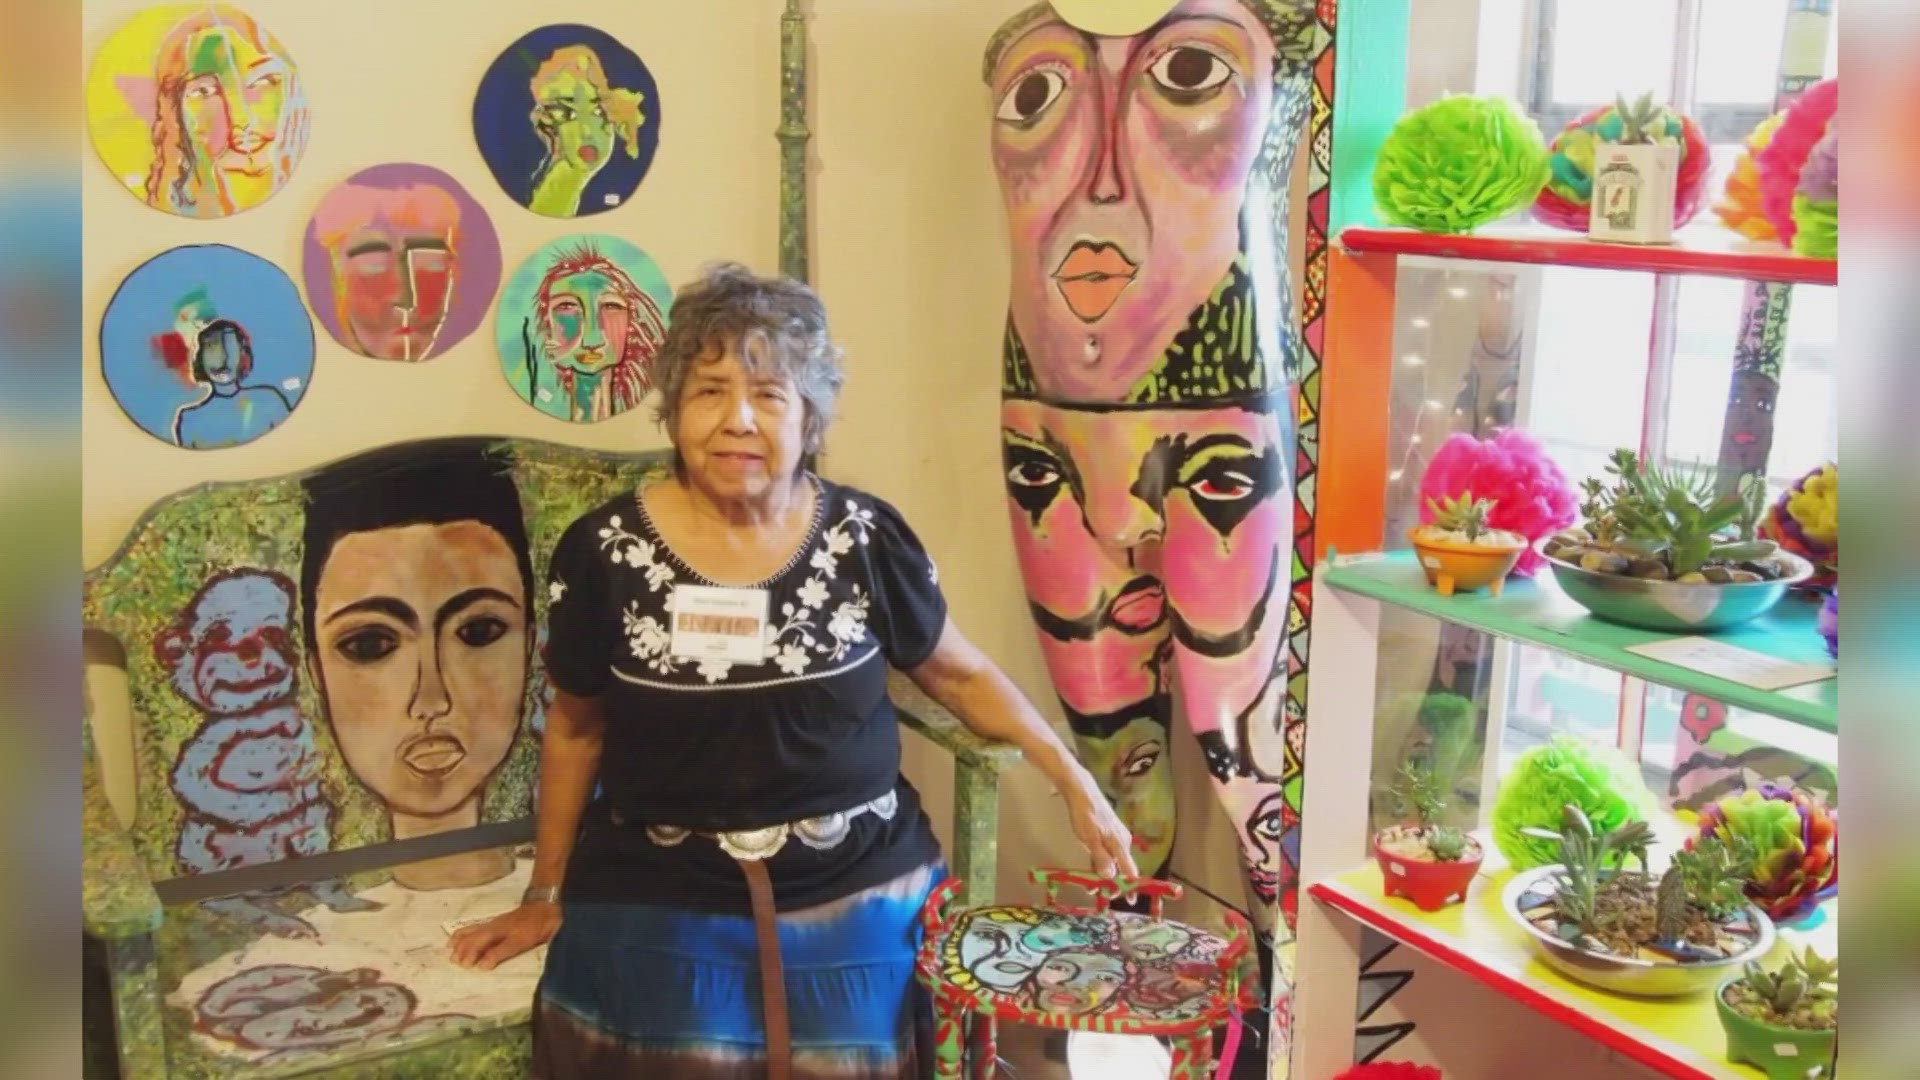 Looking for something to do in San Antonio? Reach into your inner artistic side.